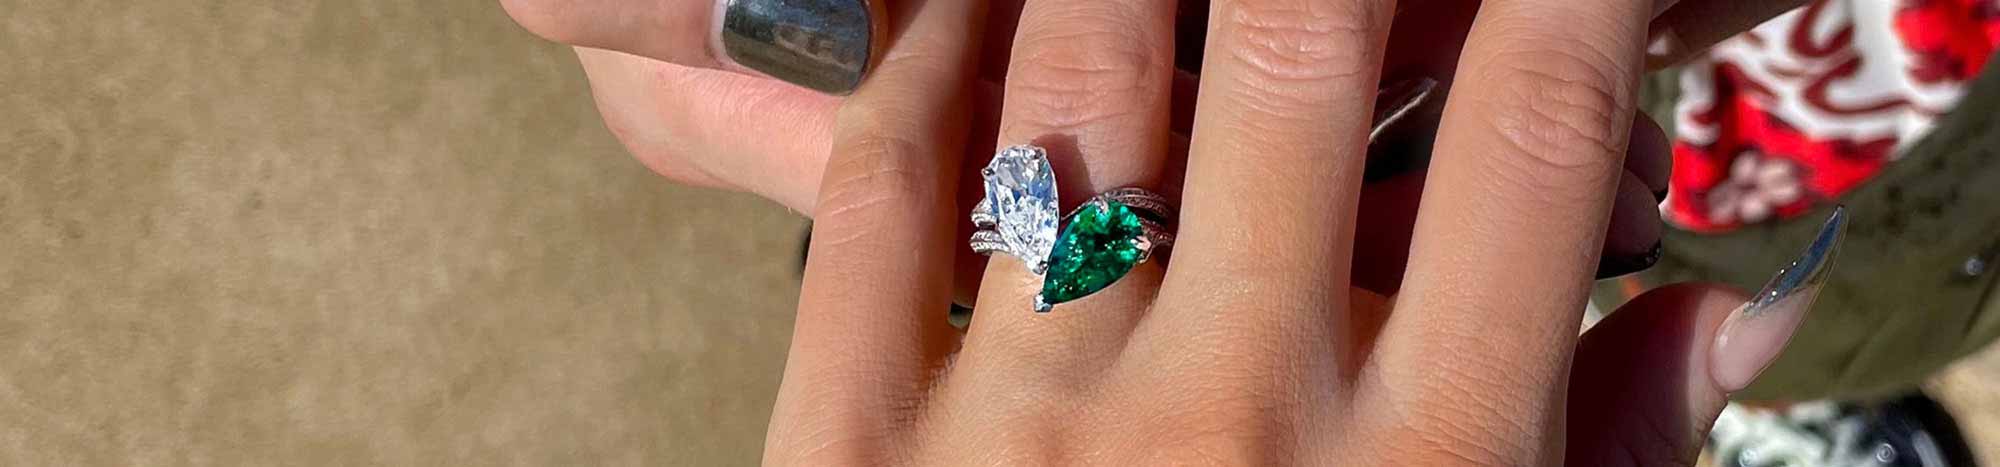 Photos Show Giant Engagement Rings That Supermodels Wear